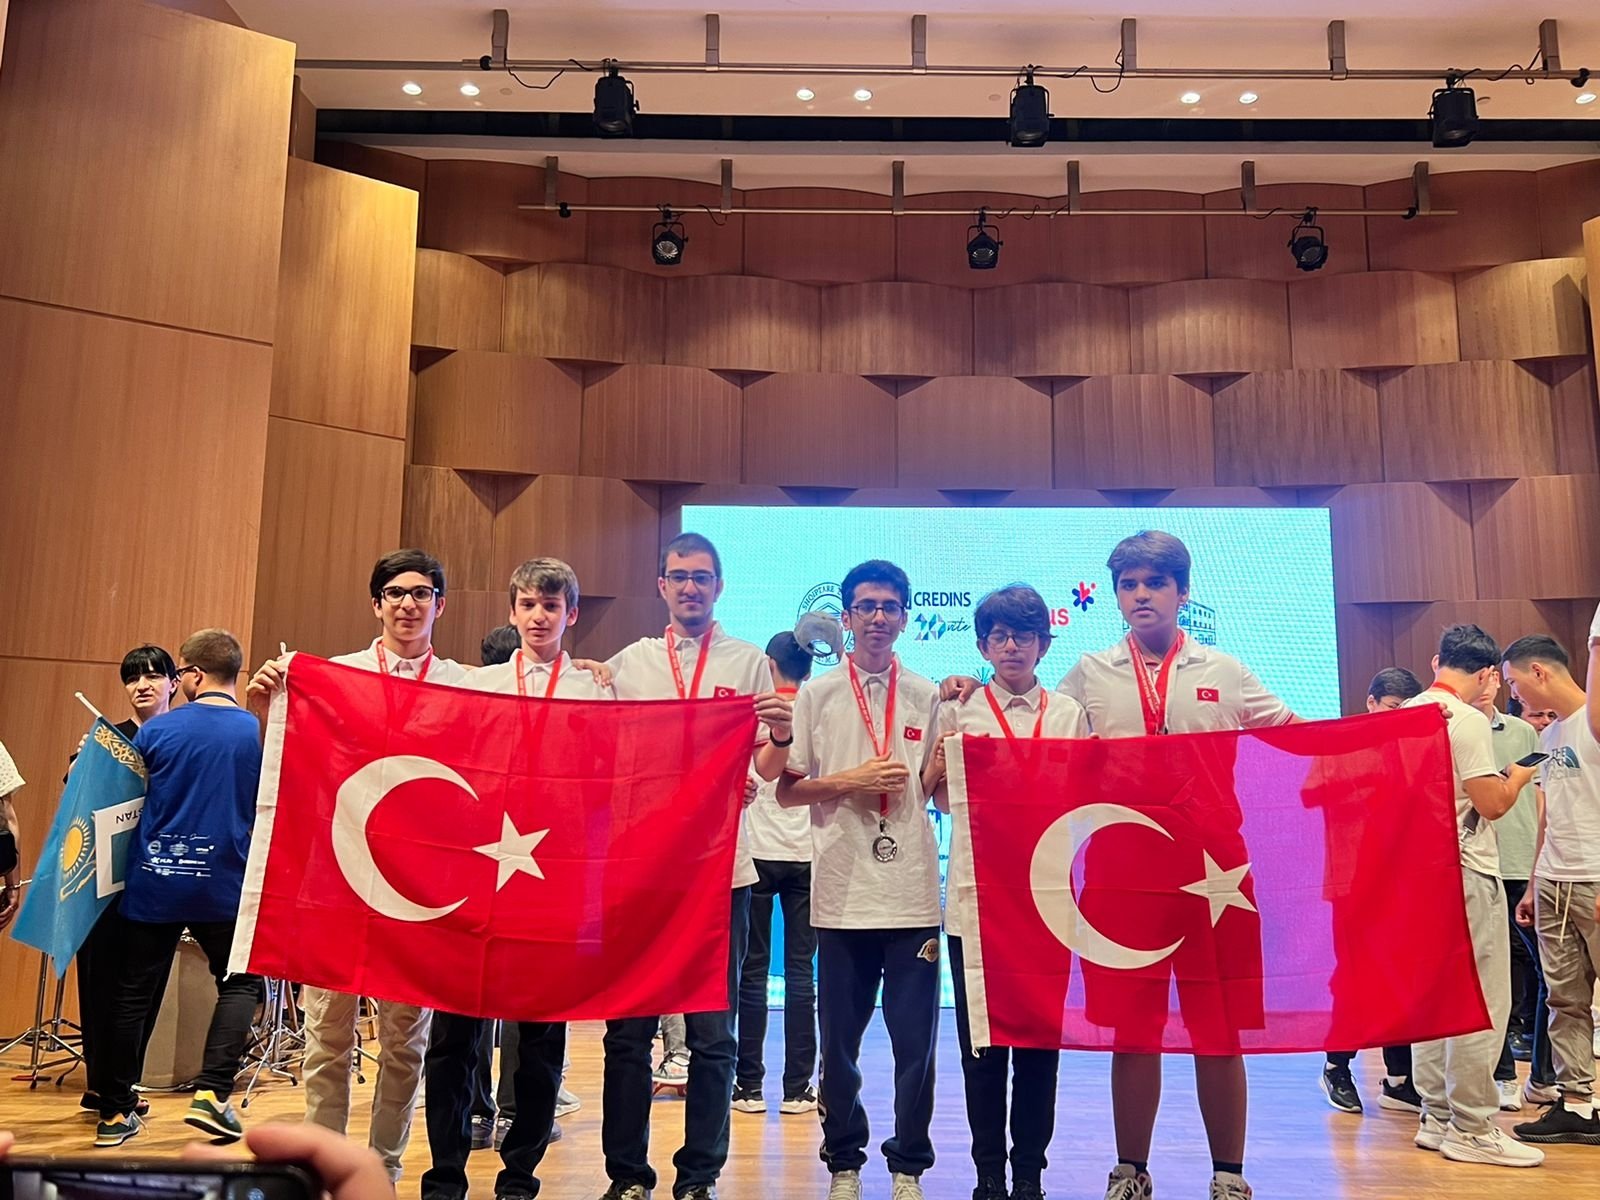 Medal winners at the 27th Young Balkan Mathematics Olympiad are photographed holding Turkish flags, Ankara, Türkiye, June 30, 2023. (DHA Photo)